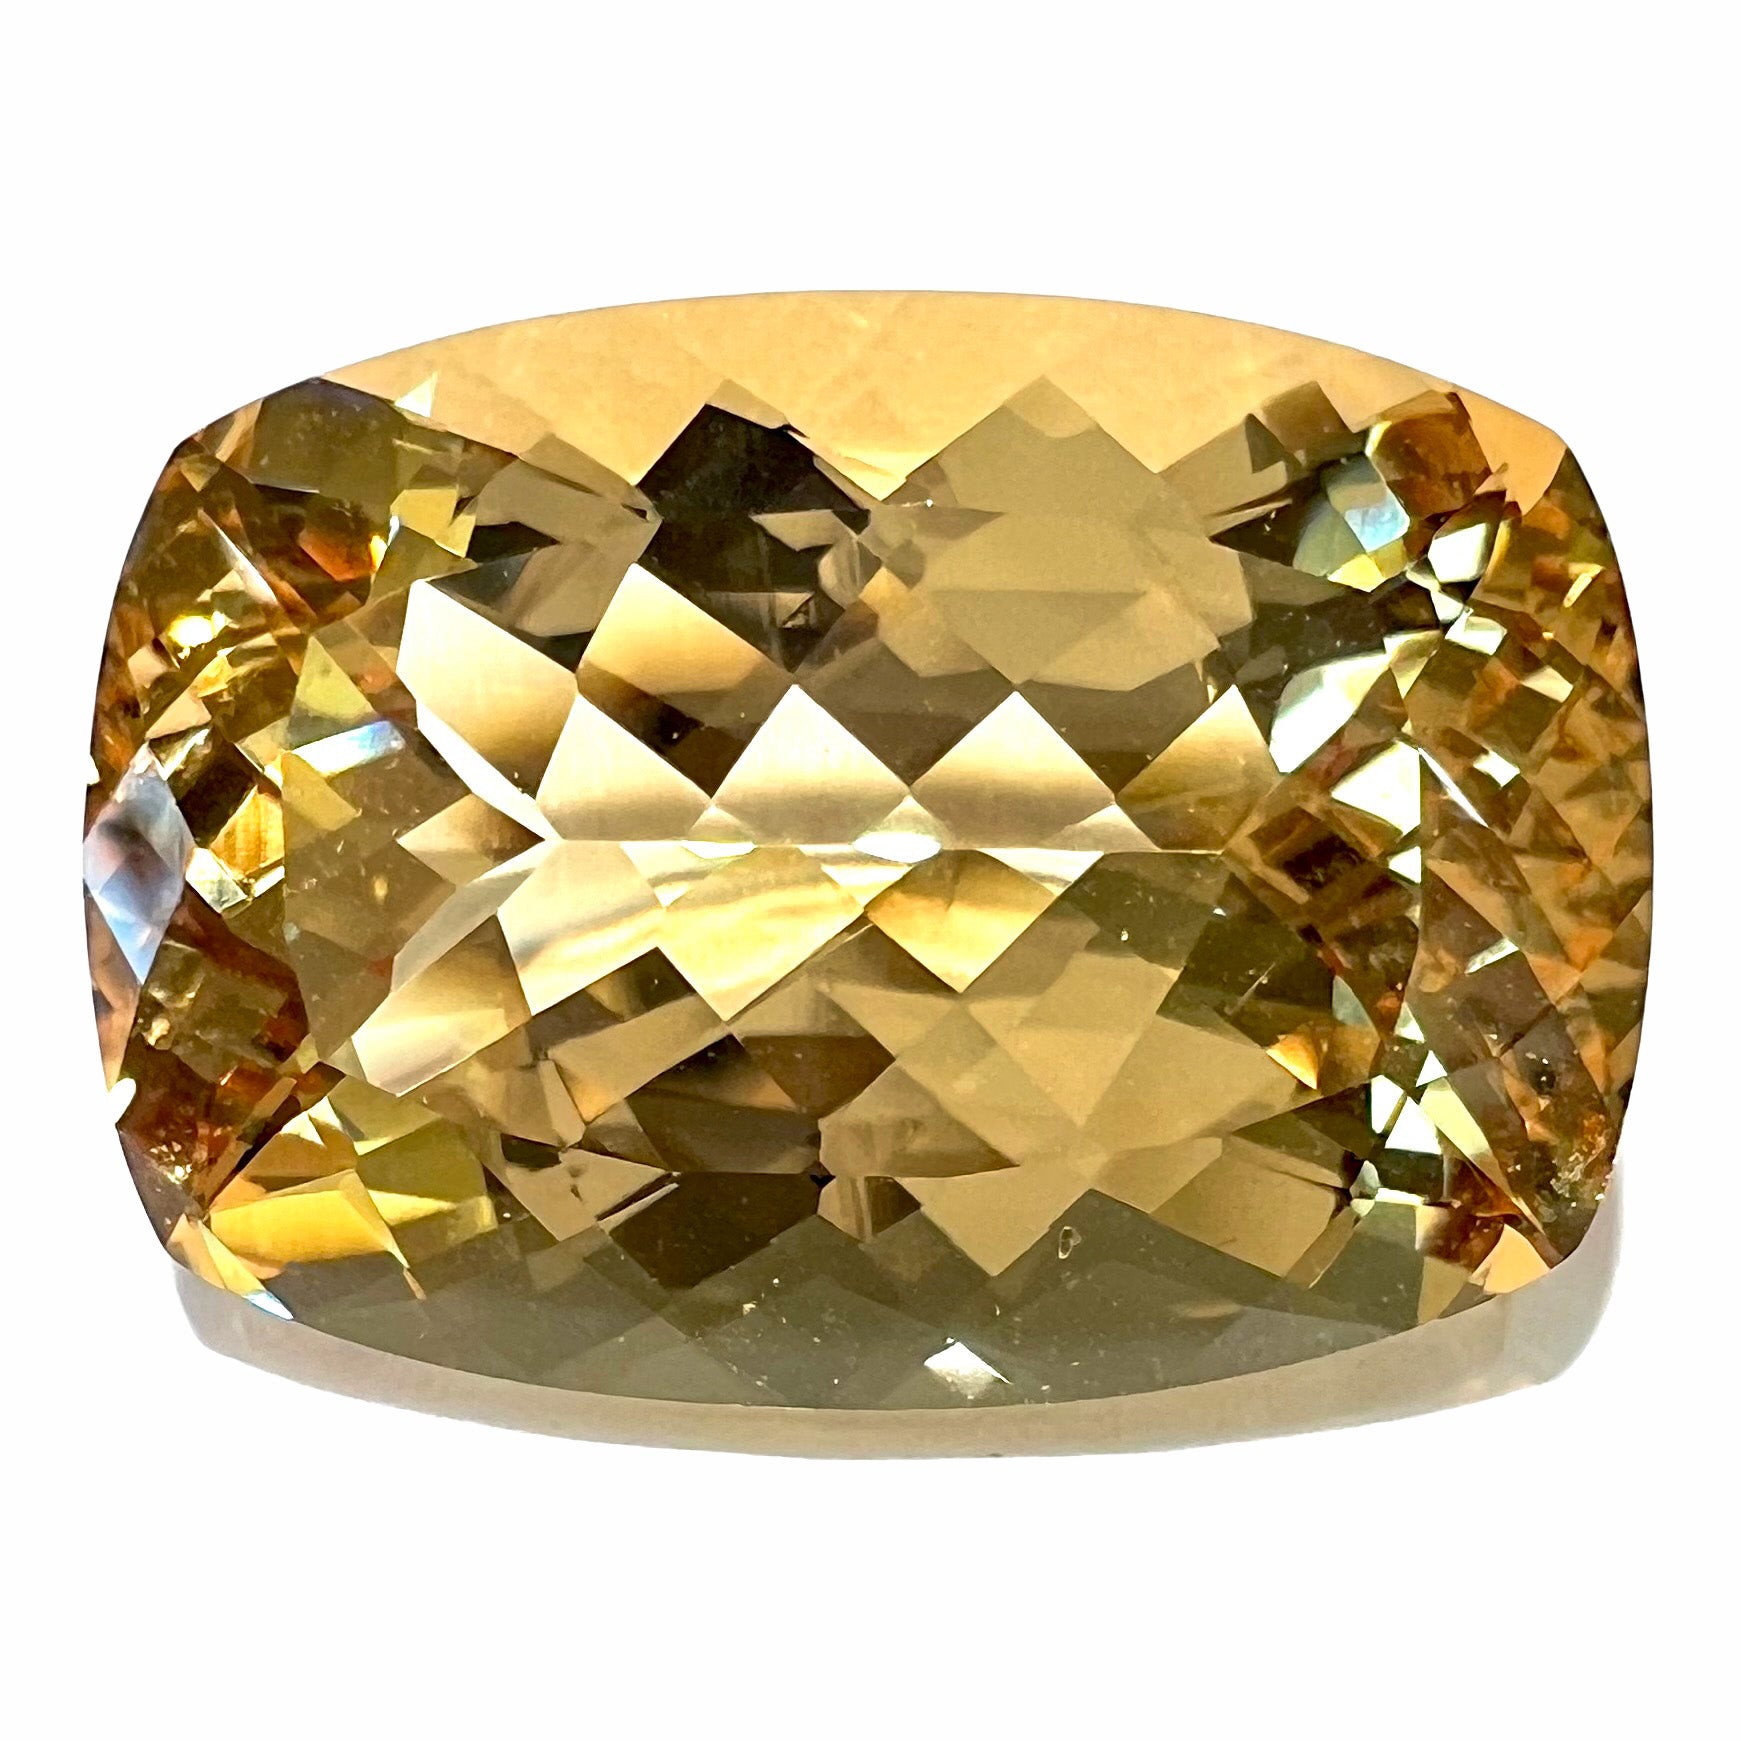 A loose, elongated cushion cut golden beryl stone gemstone.  The stone weighs 19.05 carats.